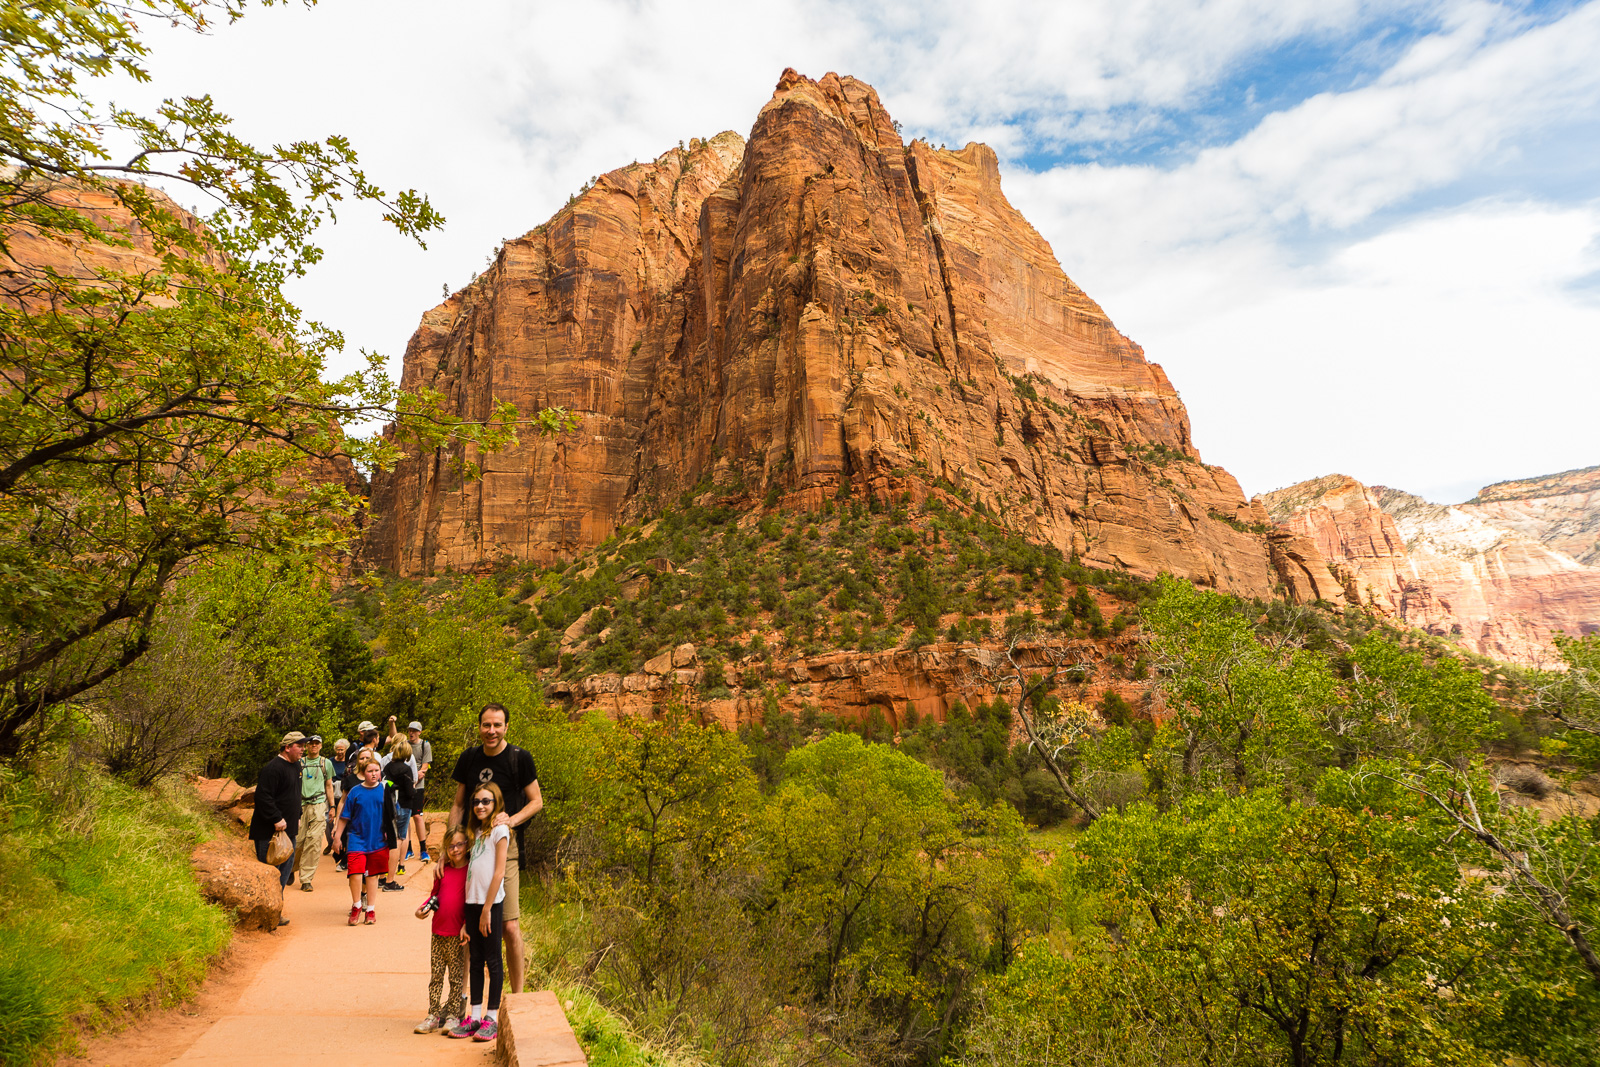 Me and My Girls on the Emerald Pools Trail | Blurbomat.com